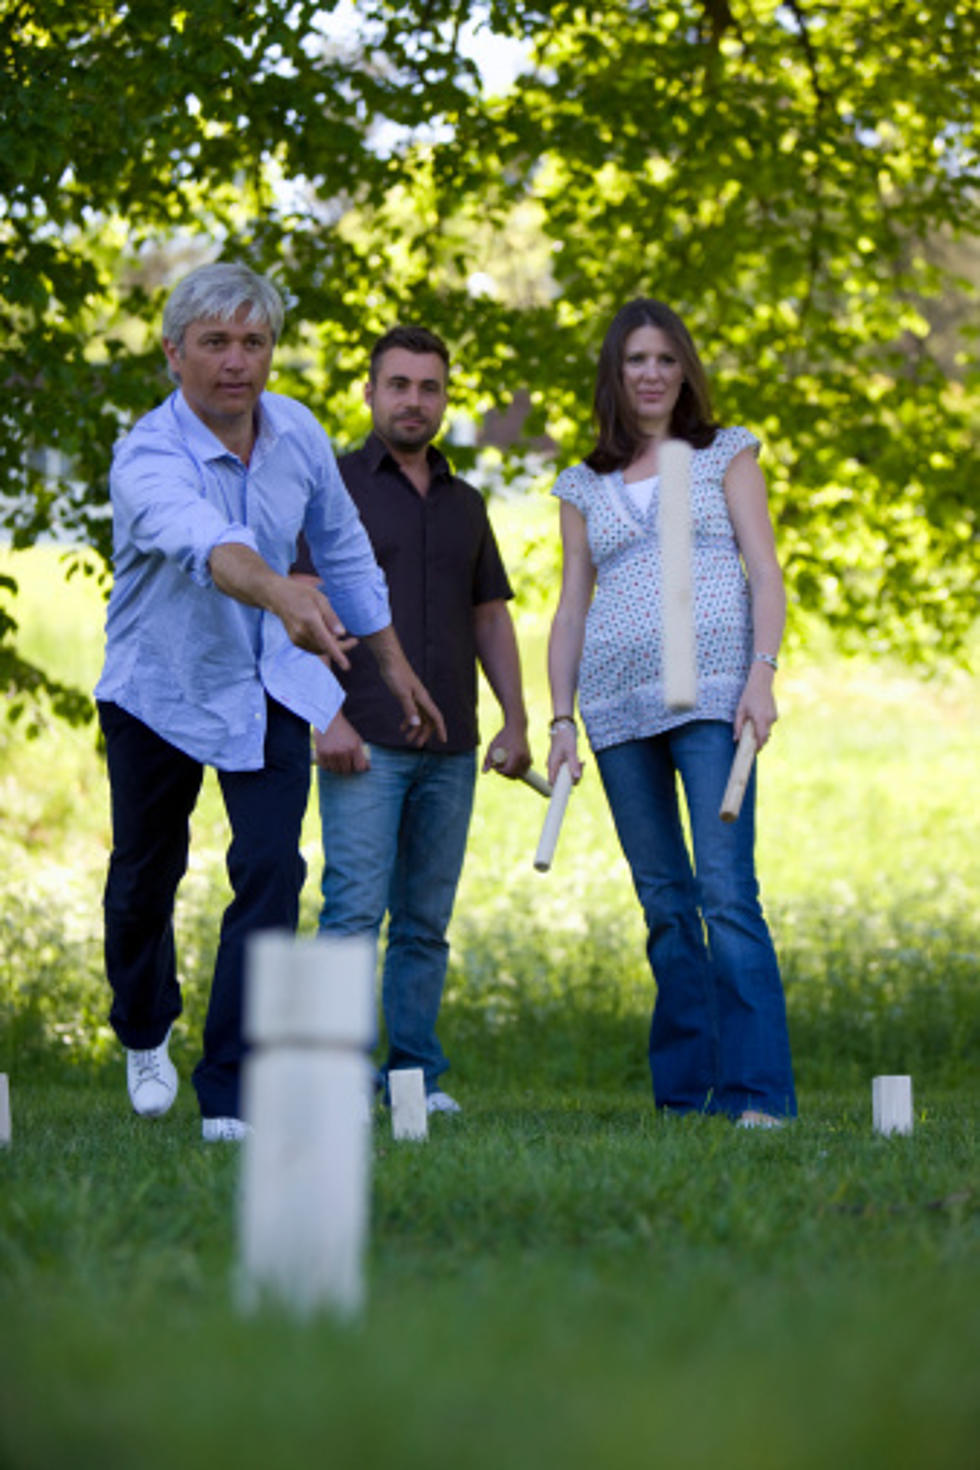 It's a Beautiful Weekend For a Kubb Game